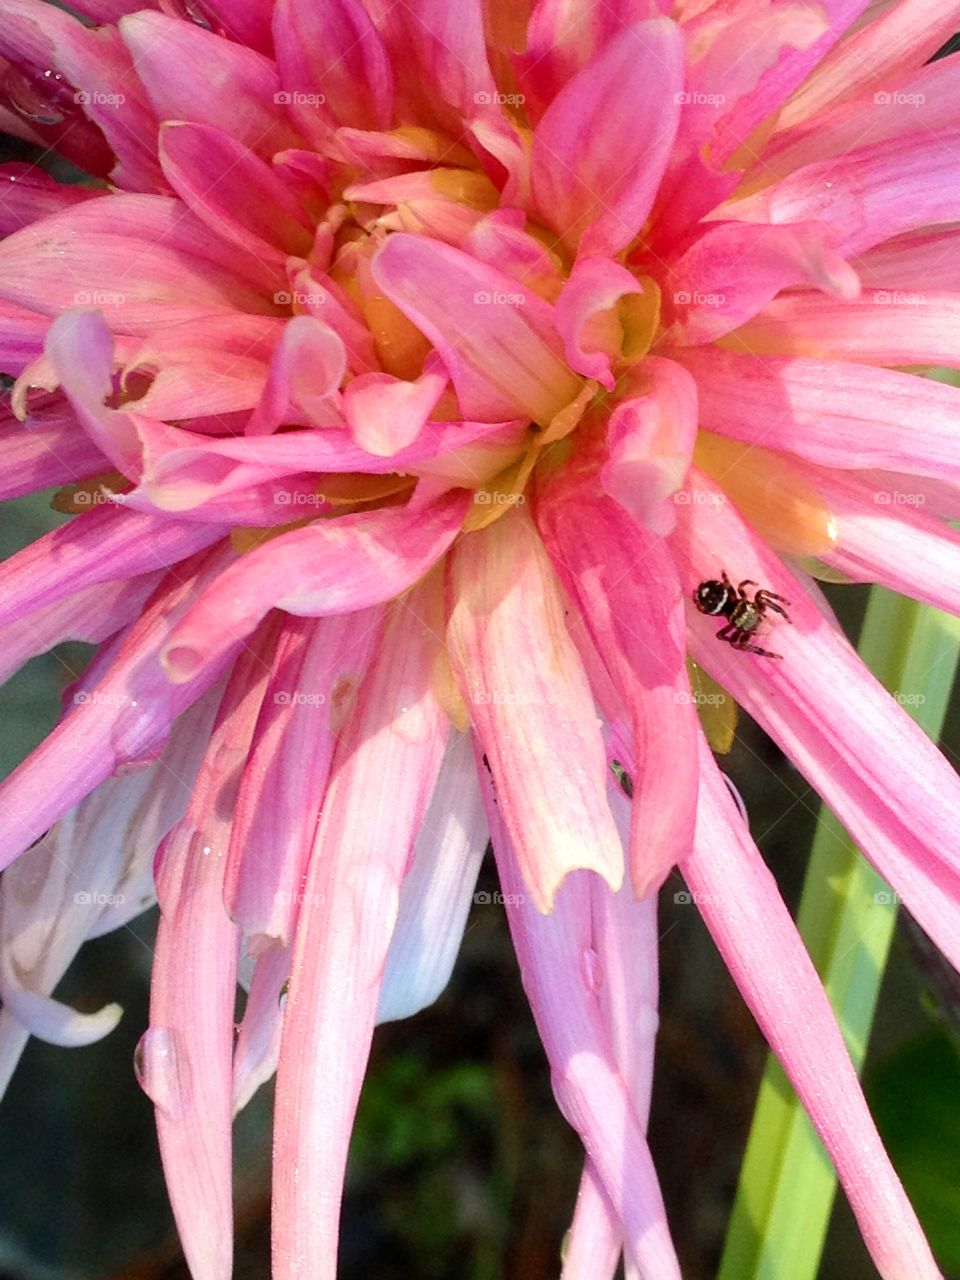 Chrysanthemum in bloom with spider on it!